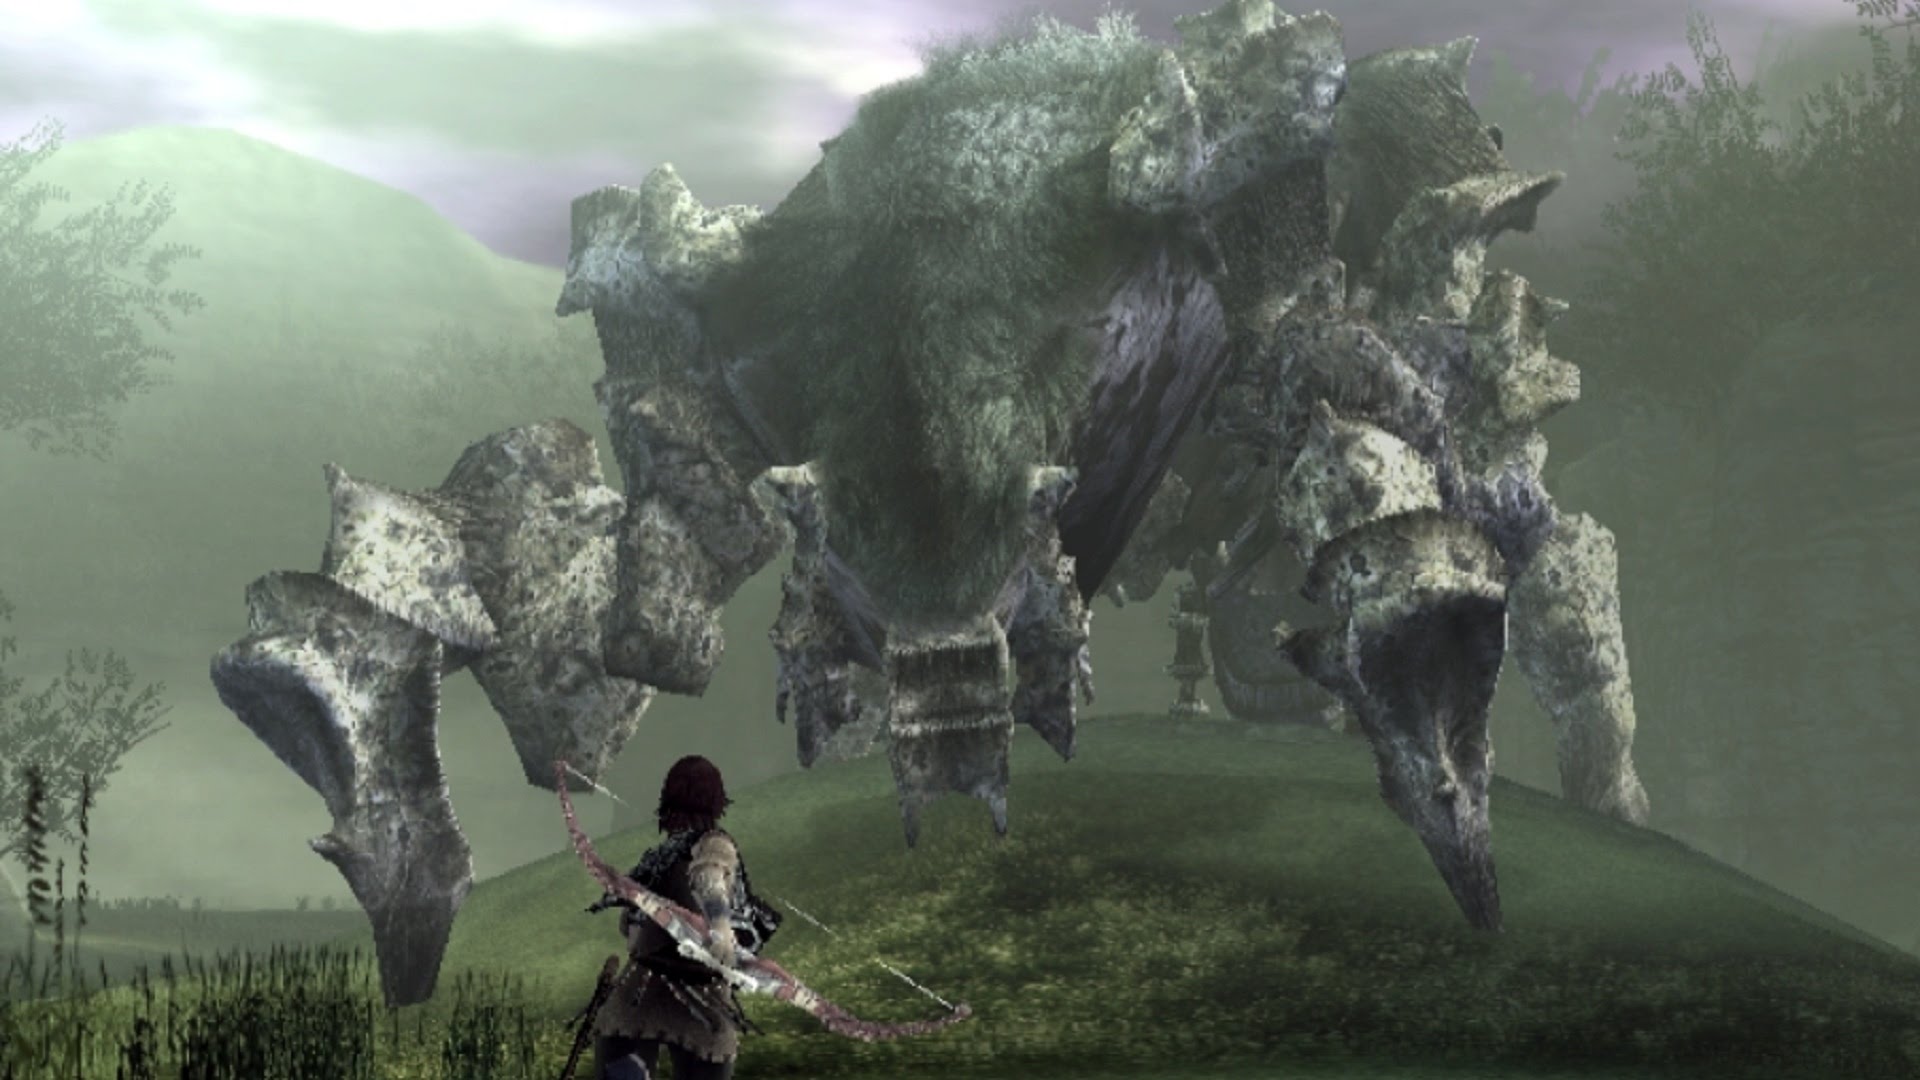 Shadow Of The Colossus Backgrounds, Compatible - PC, Mobile, Gadgets| 1920x1080 px